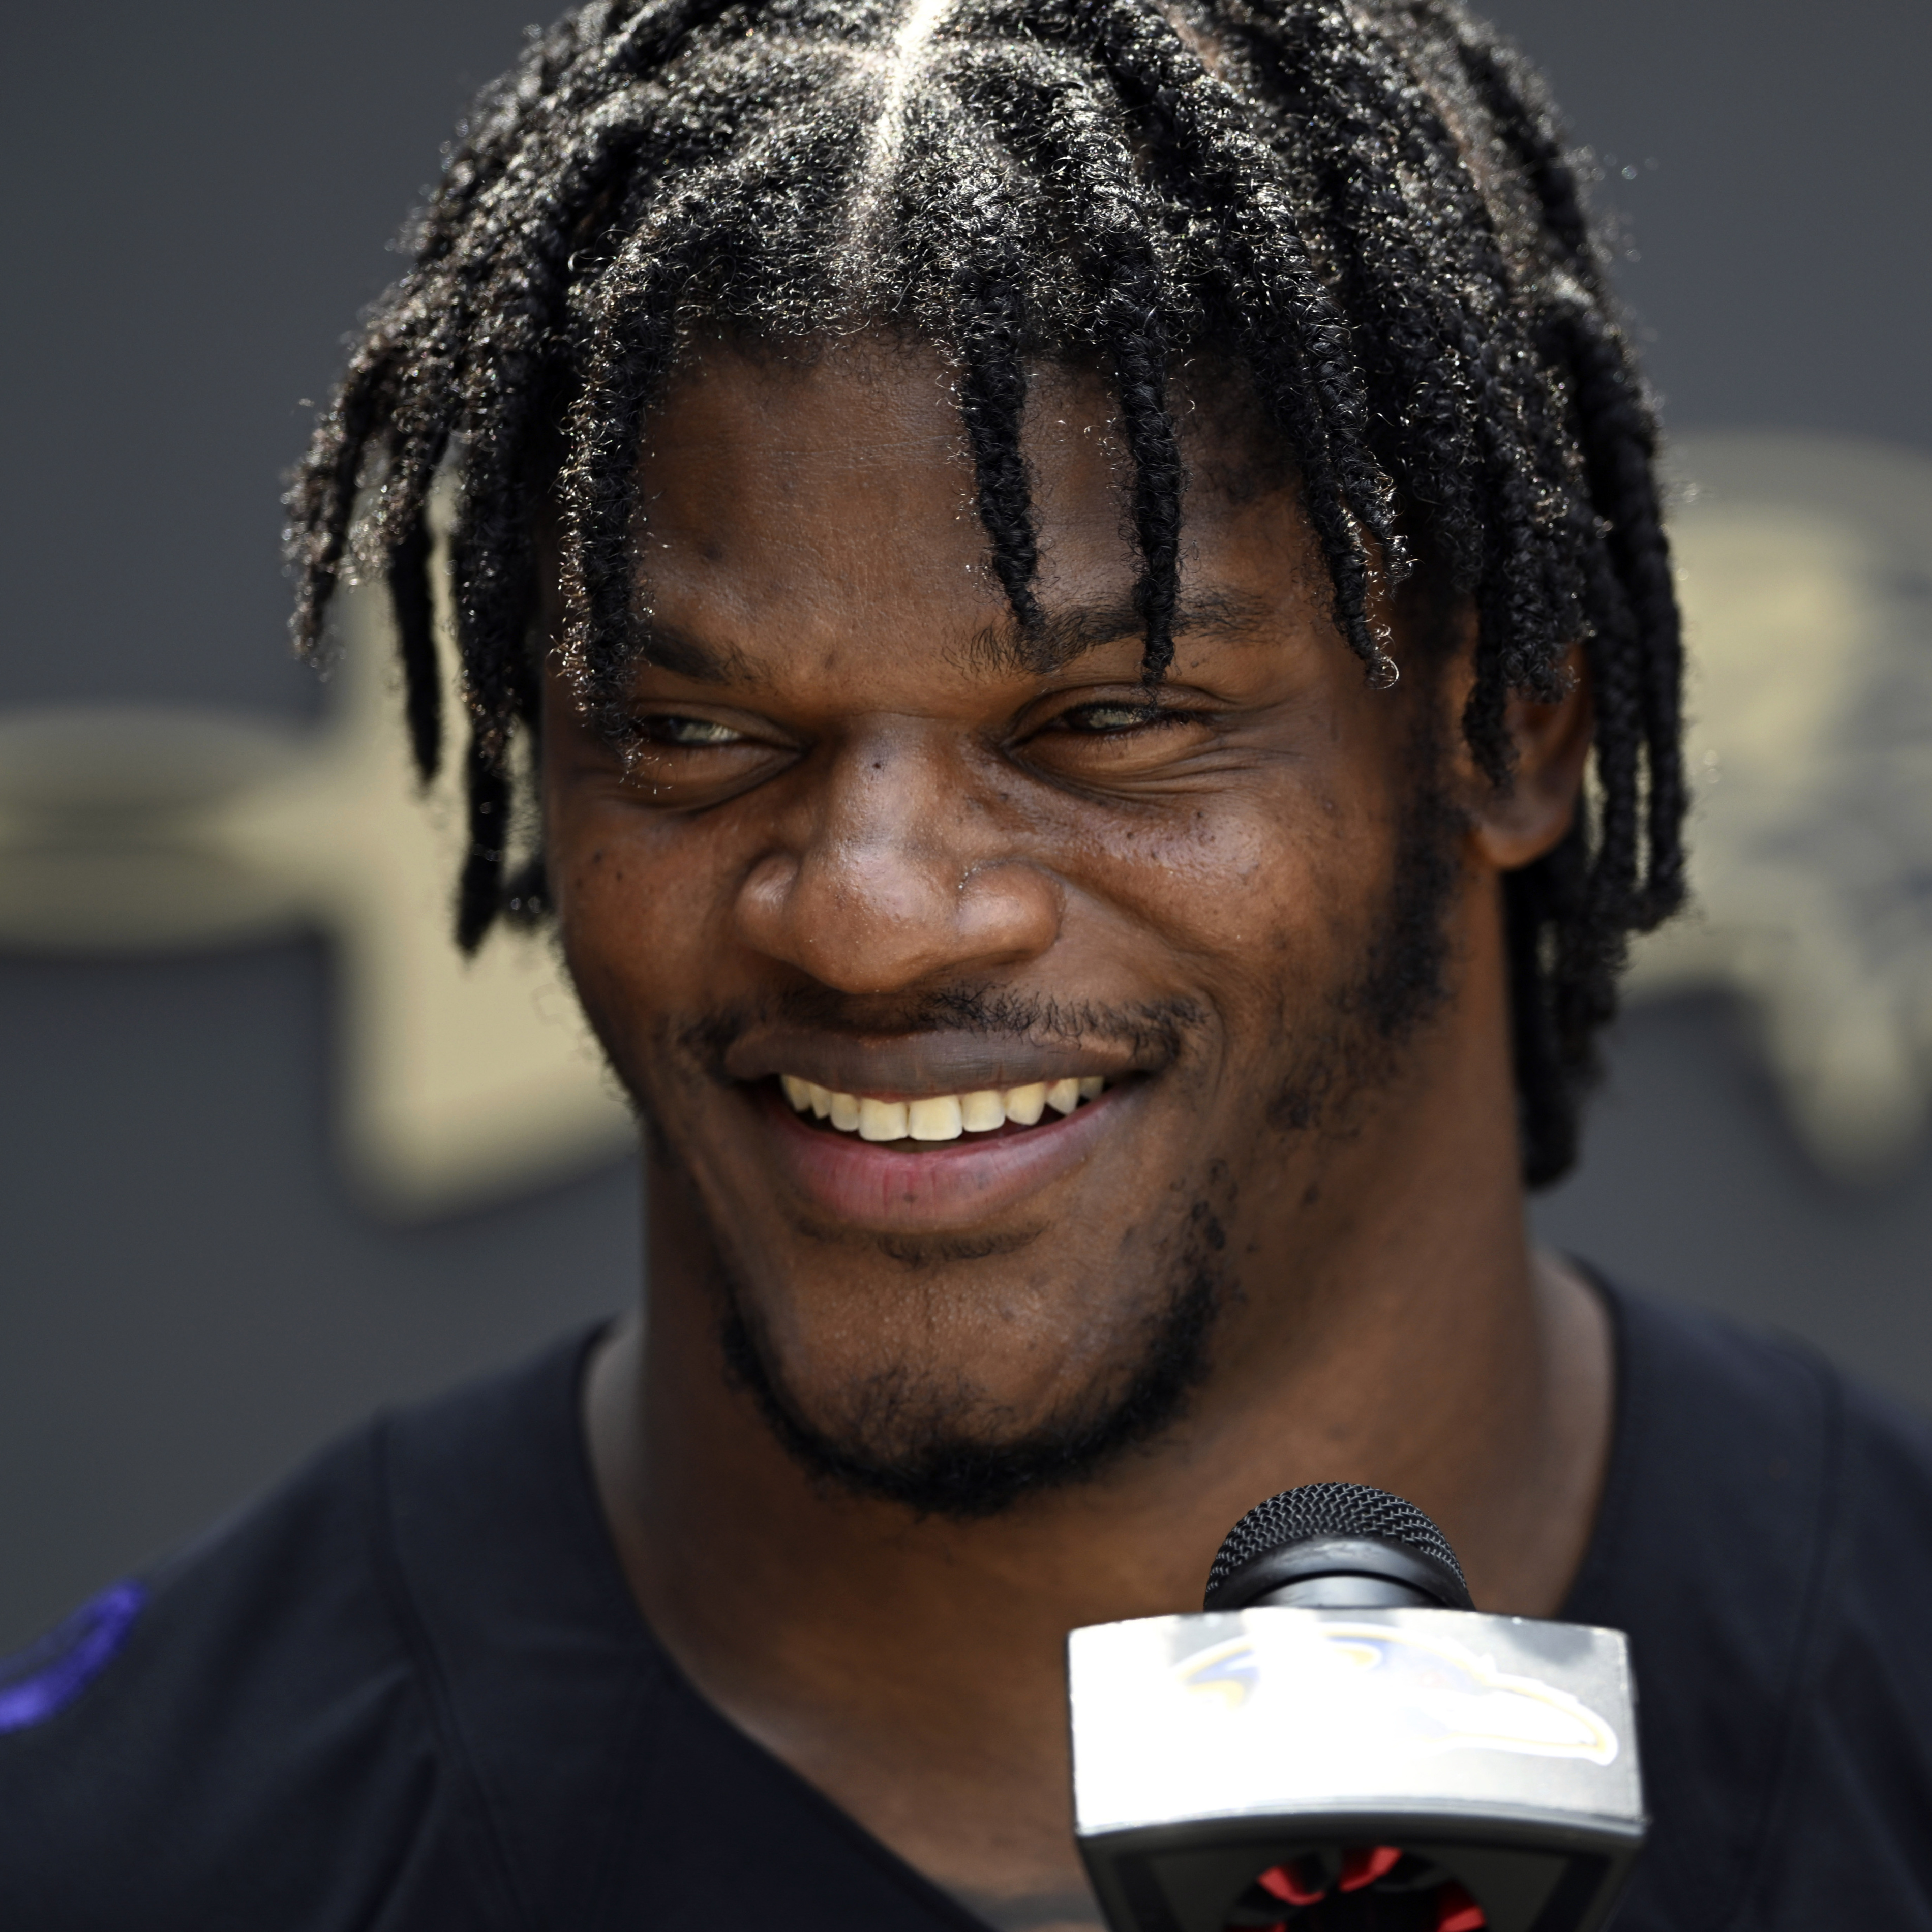 Ravens' Lamar Jackson Changes IG Profile Picture to 'I Need $' amid Contract Tal..